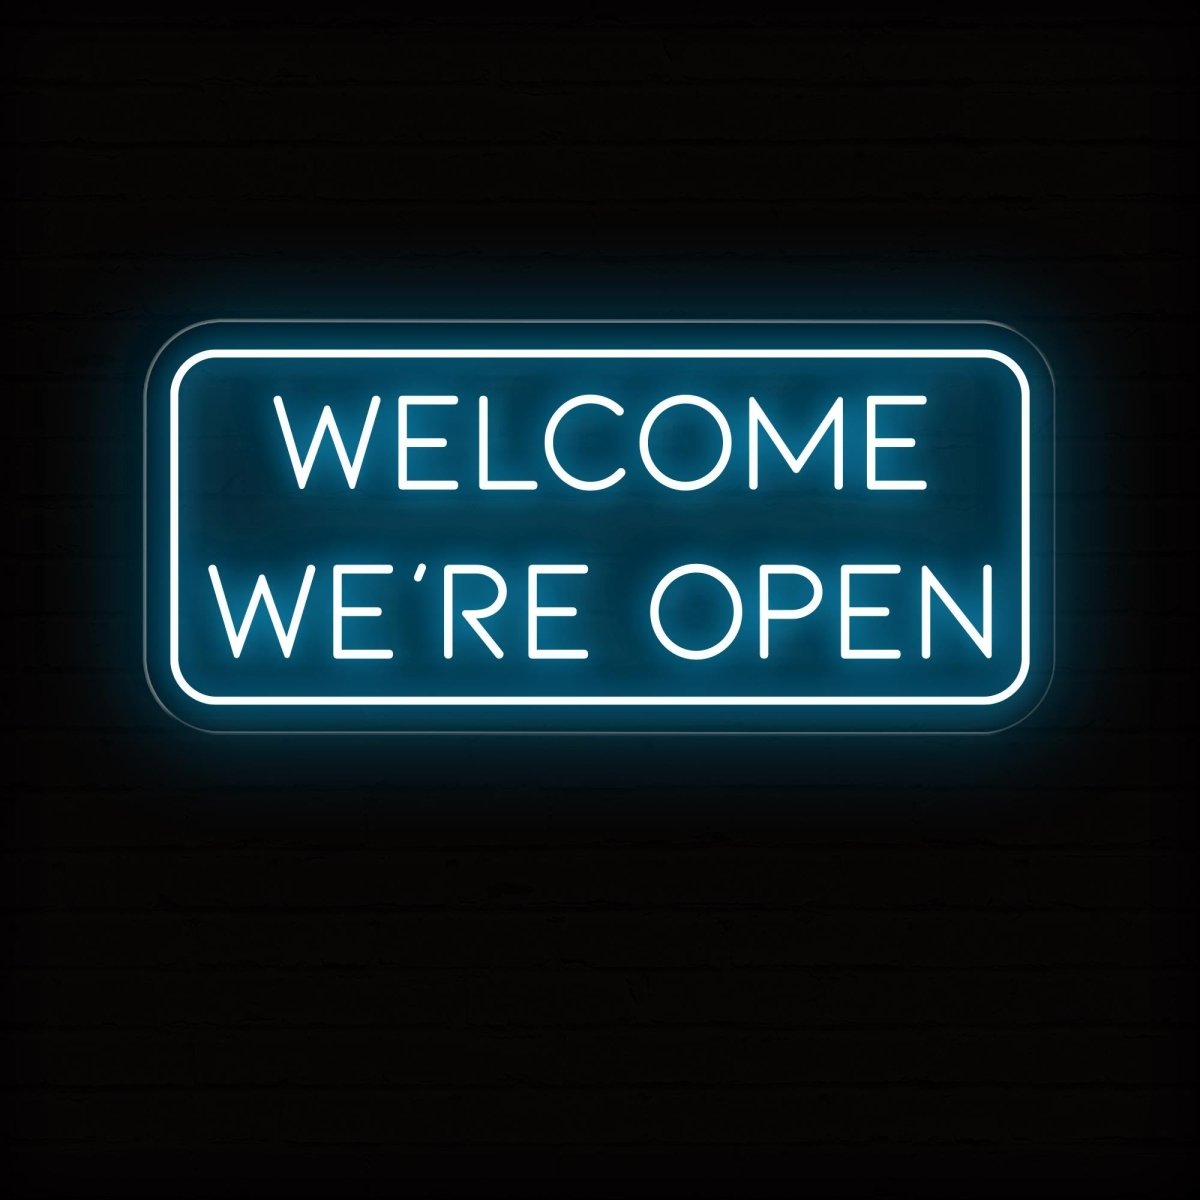 Welcome We're Open Neon Sign | Business Window Light - NEONXPERT